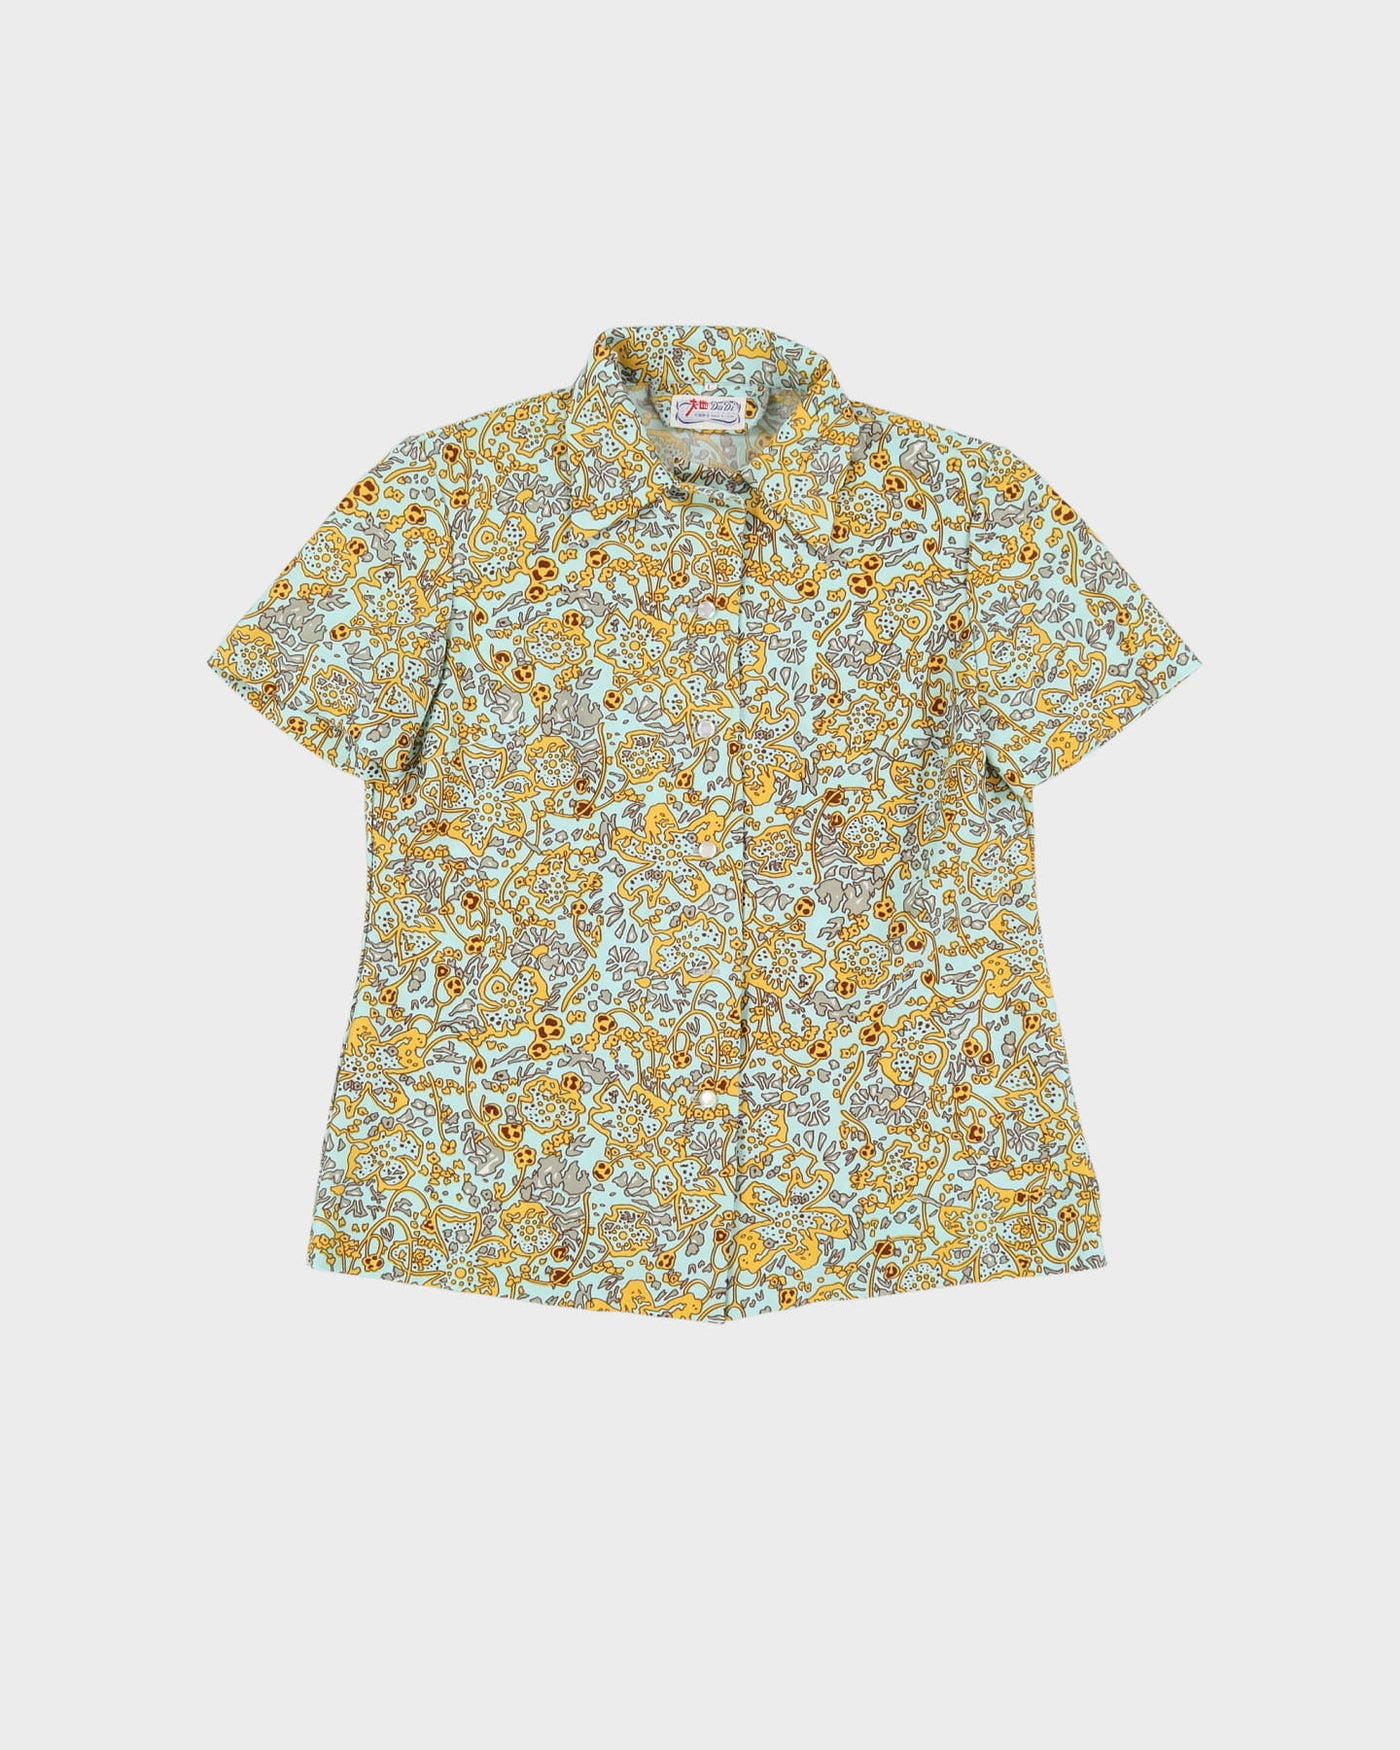 Vintage 1970s Yellow Pattered Blouse - S